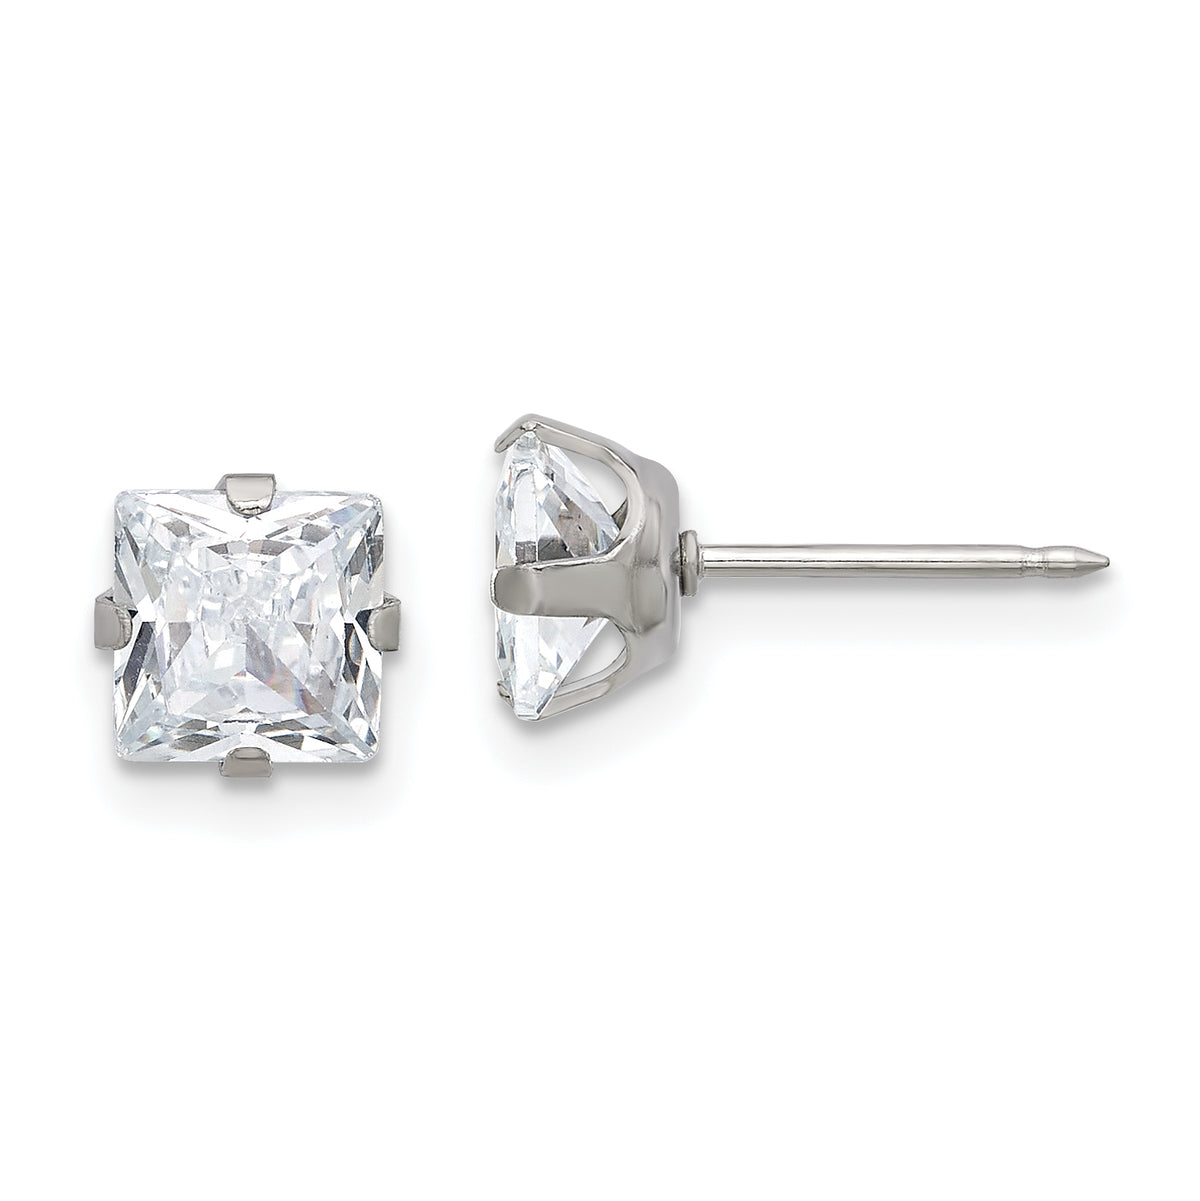 Inverness Stainless Steel 6mm Square CZ Post Earrings